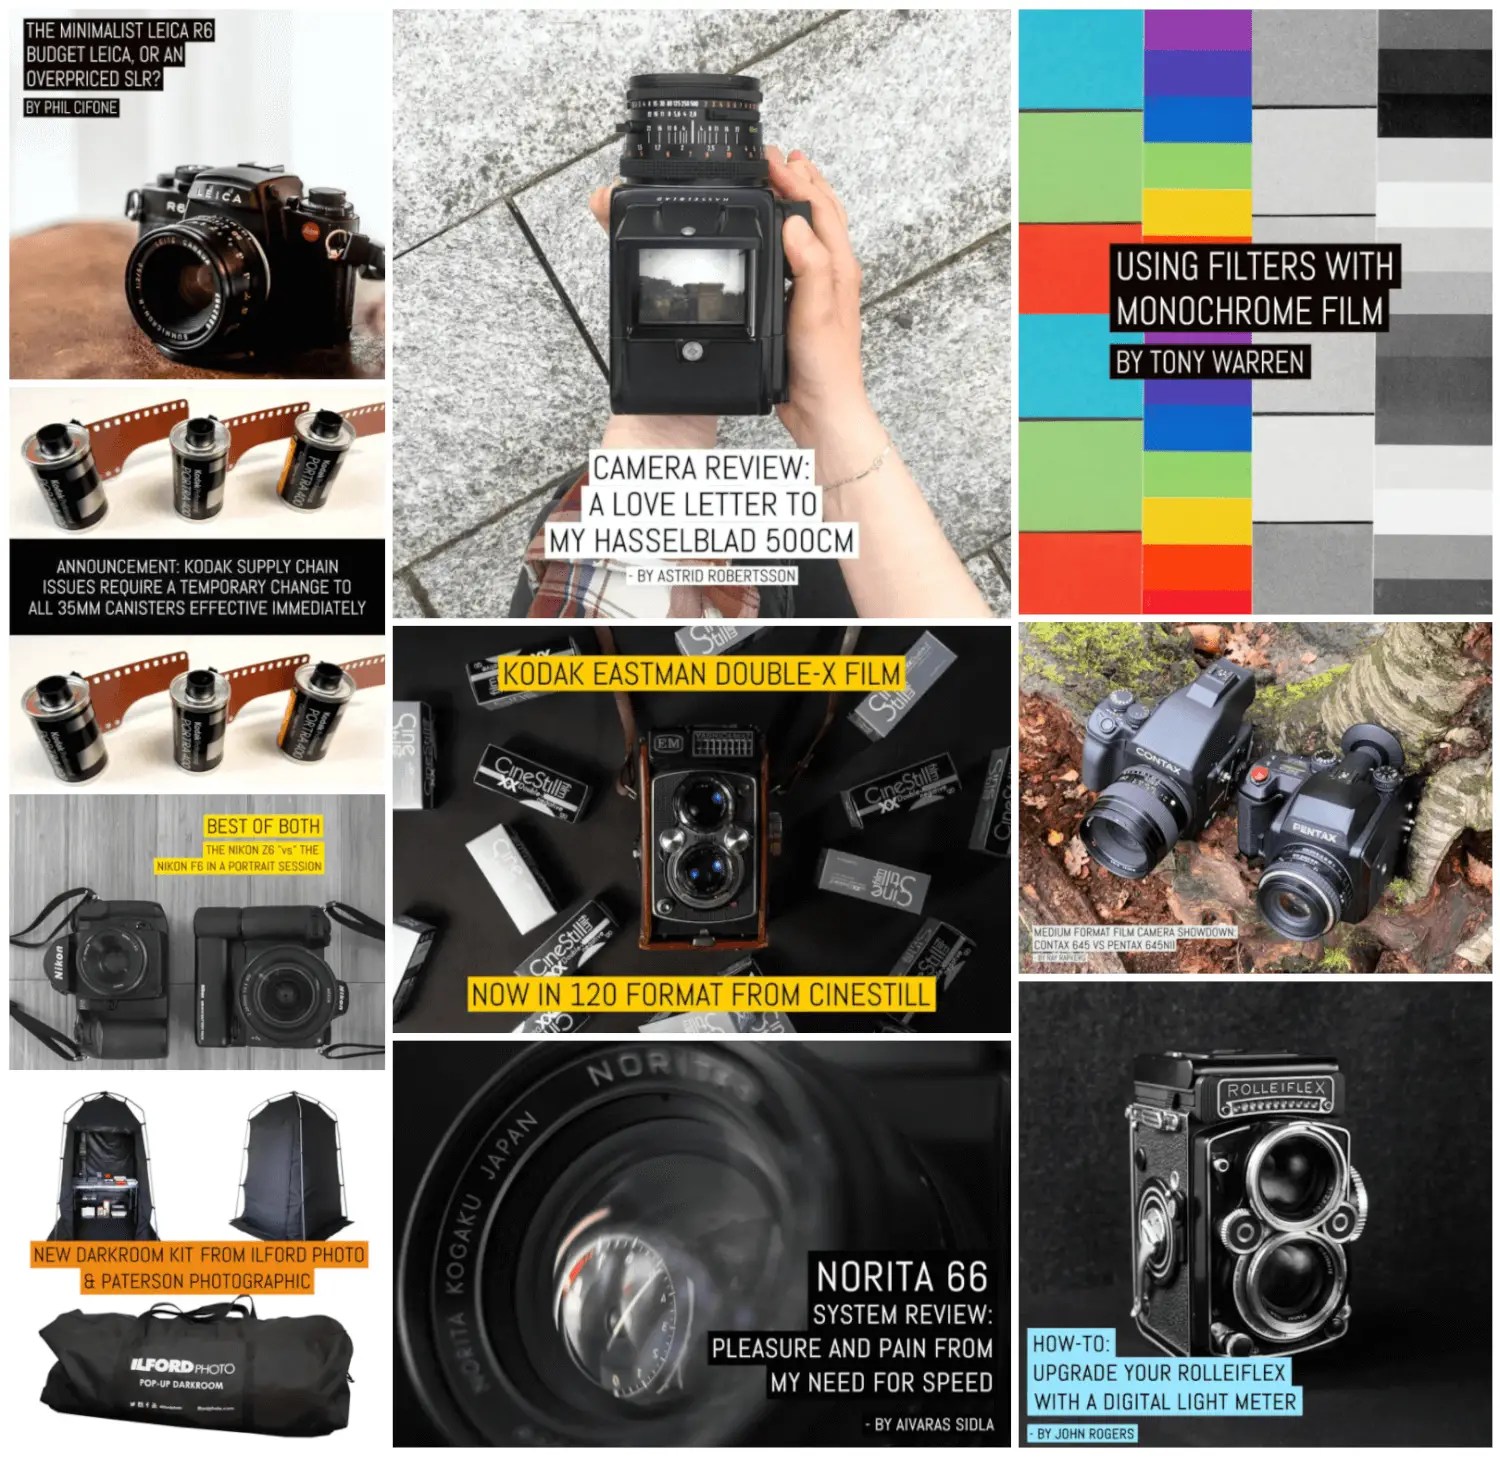 EMULSIVE’s most popular articles of 2021